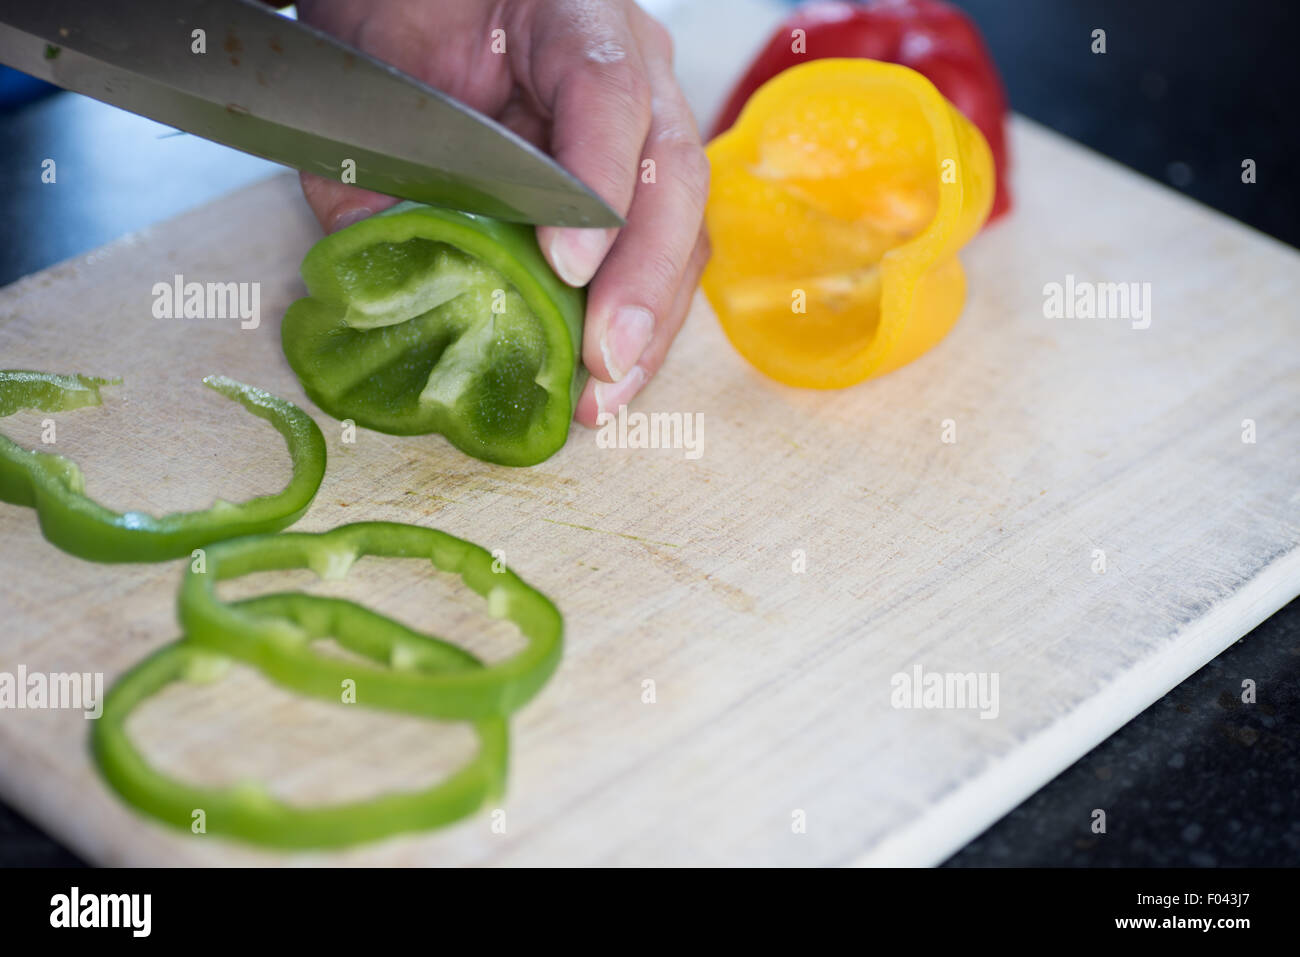 A  Man preparing a green, yellow and red pepper for a meal Stock Photo